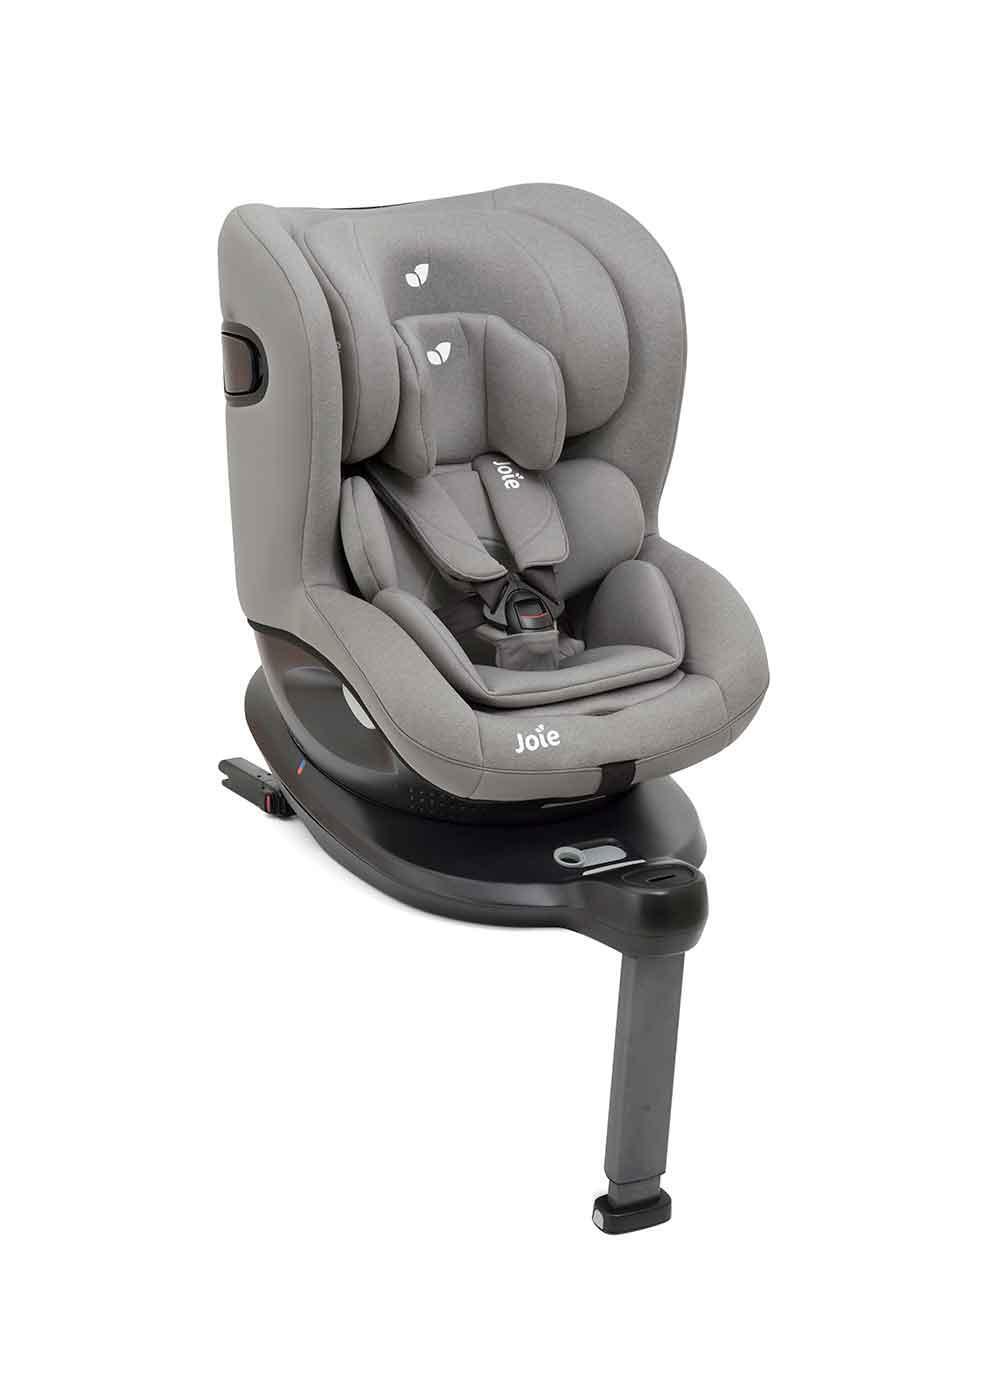 https://www.nordbaby.com/products/images/g120000/123488/car-seats-0-18kg-joie-gray-flannel-joie-i-spin-360-car-seat-40-105cm-childseat-grey-flannel-123488-62721.jpg